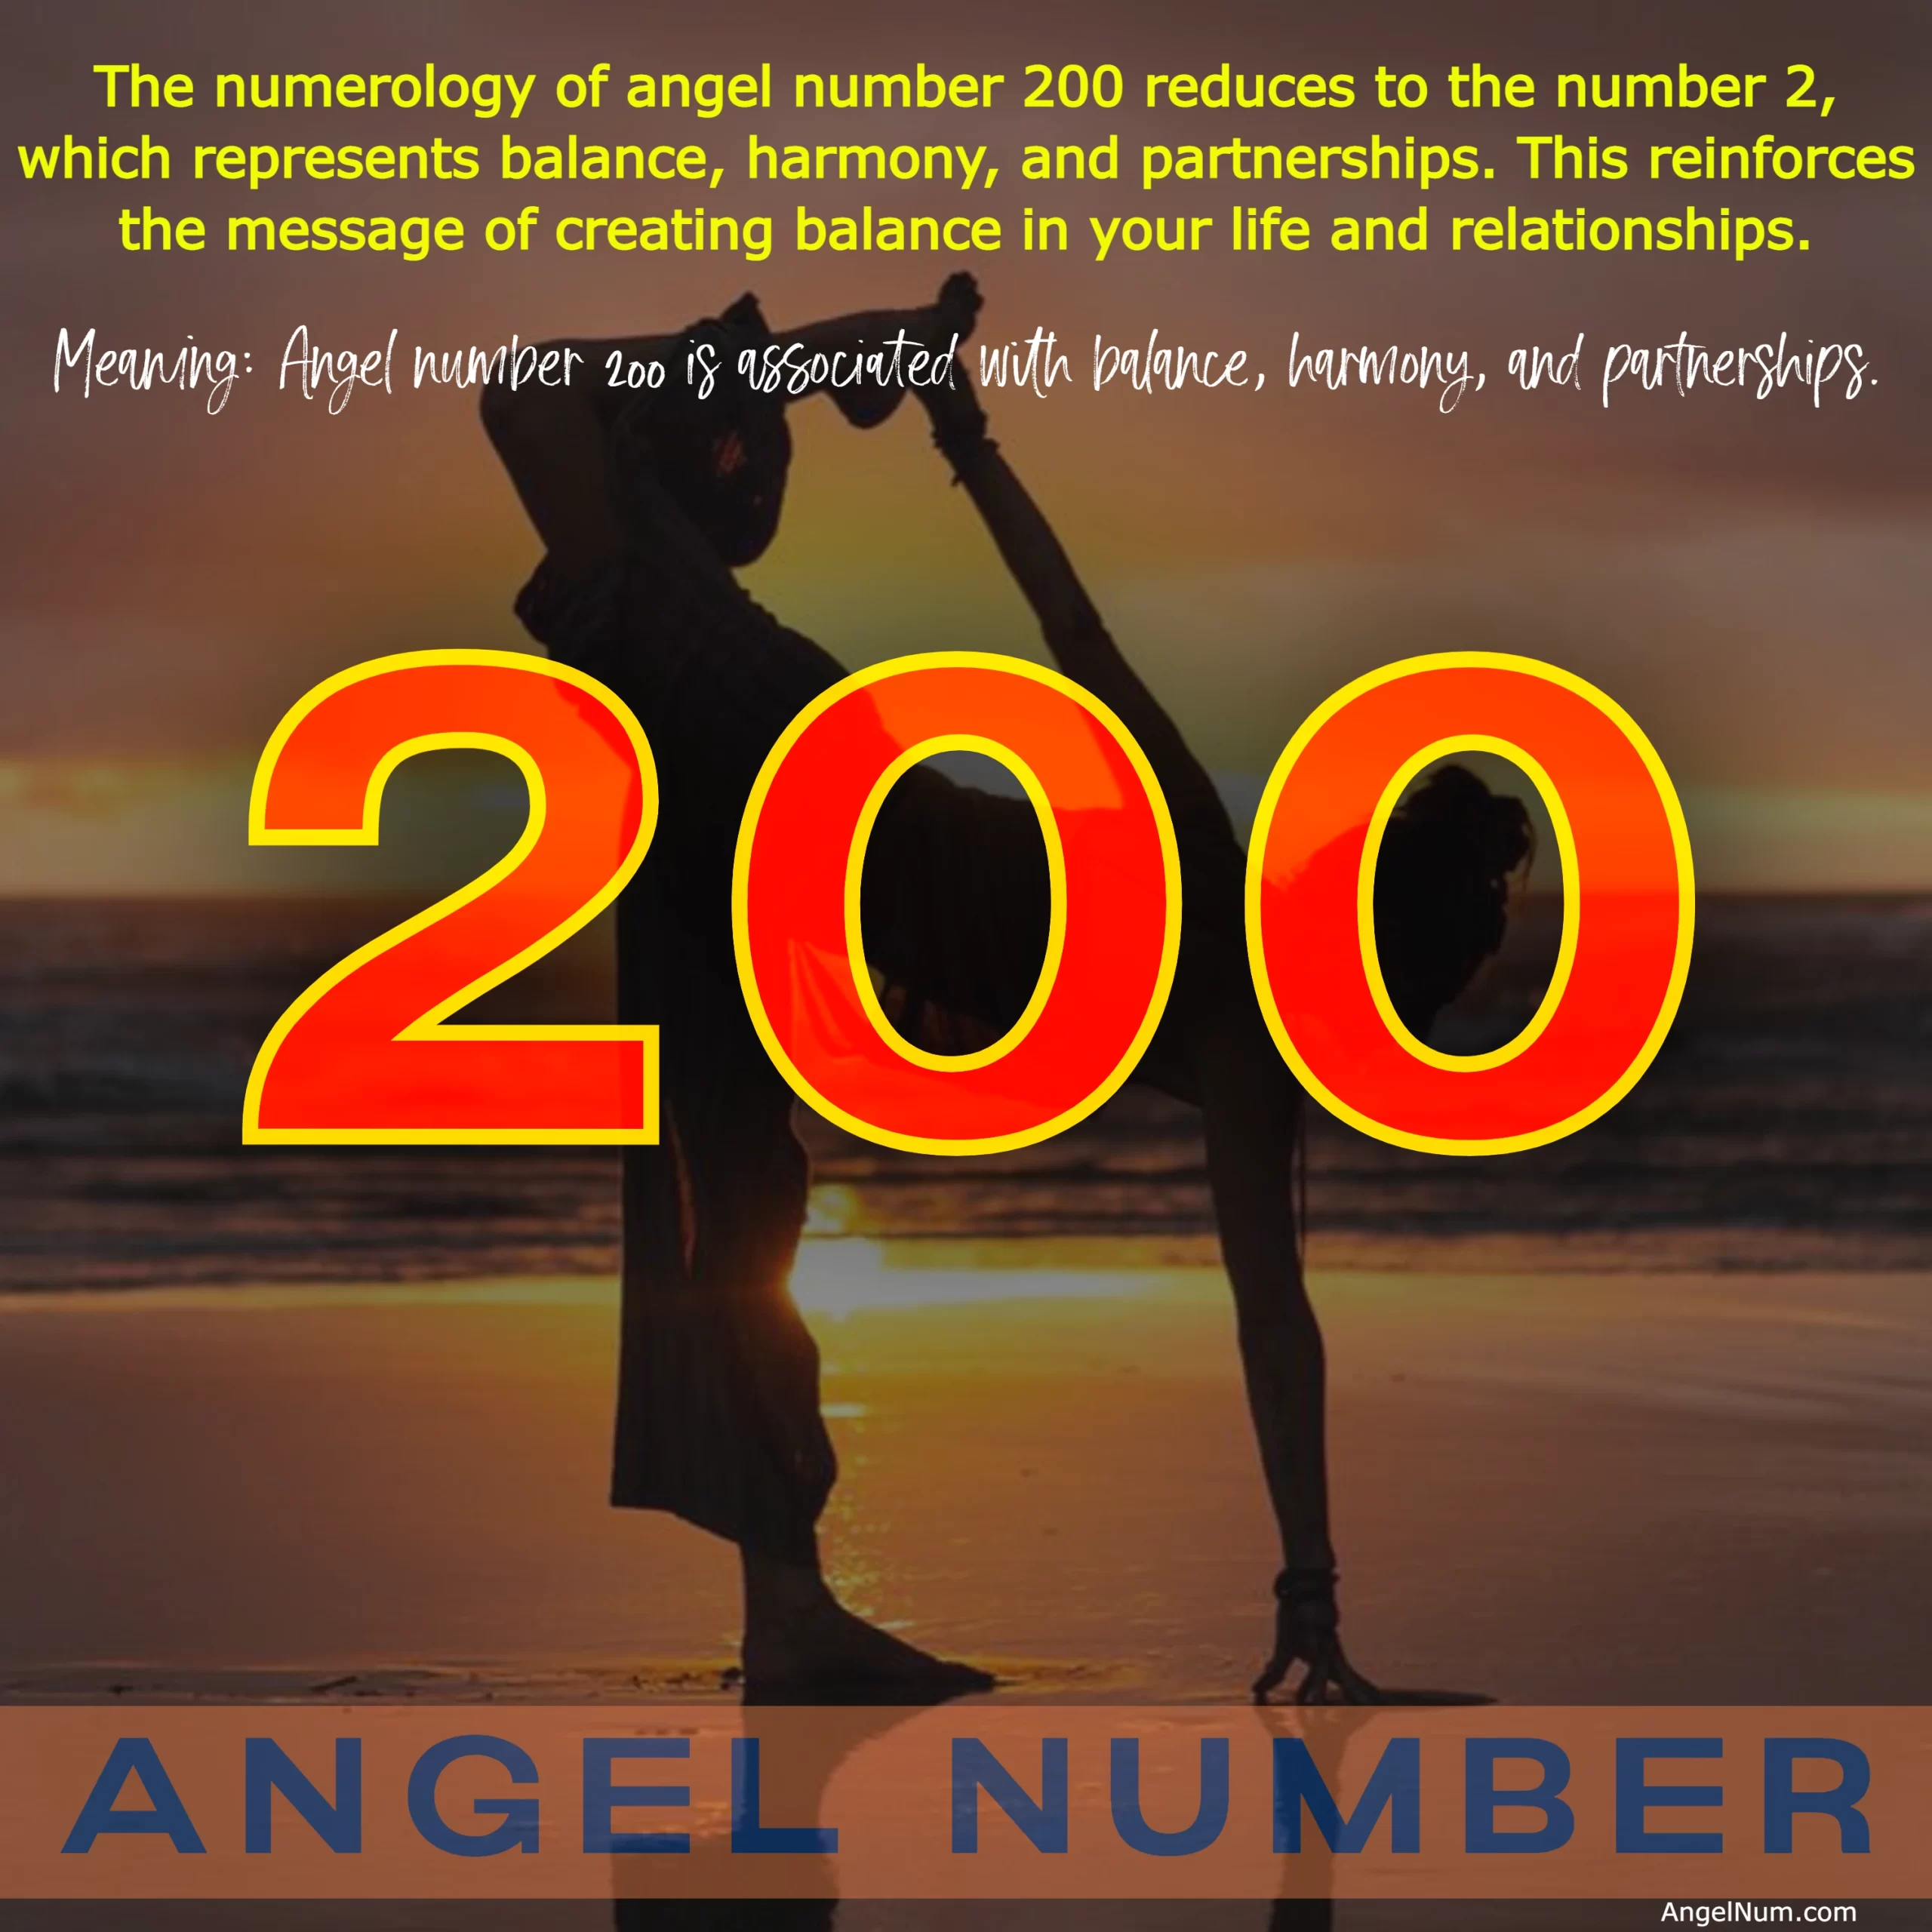 Angel Number 200: The Message of Balance and Harmony